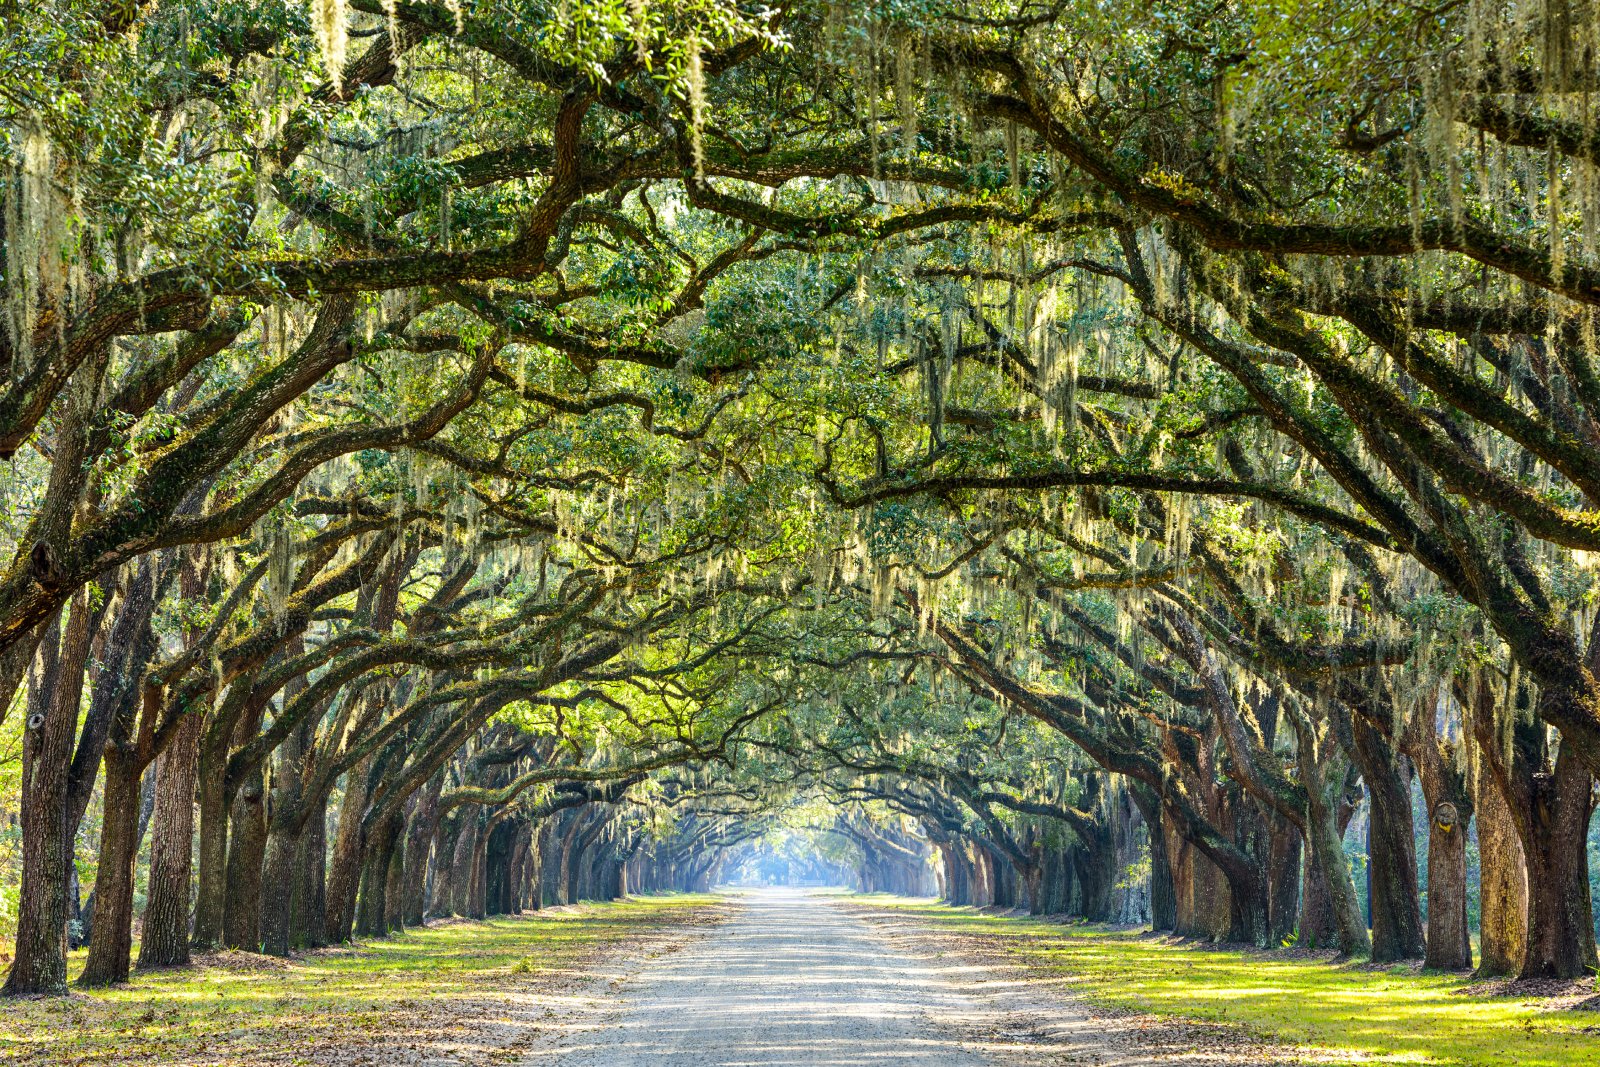 <p><span>Experience the timeless beauty and Southern charm of Savannah, with its historic squares, oak-lined streets, and Spanish moss that evoke the ambiance of the Old World.</span></p>